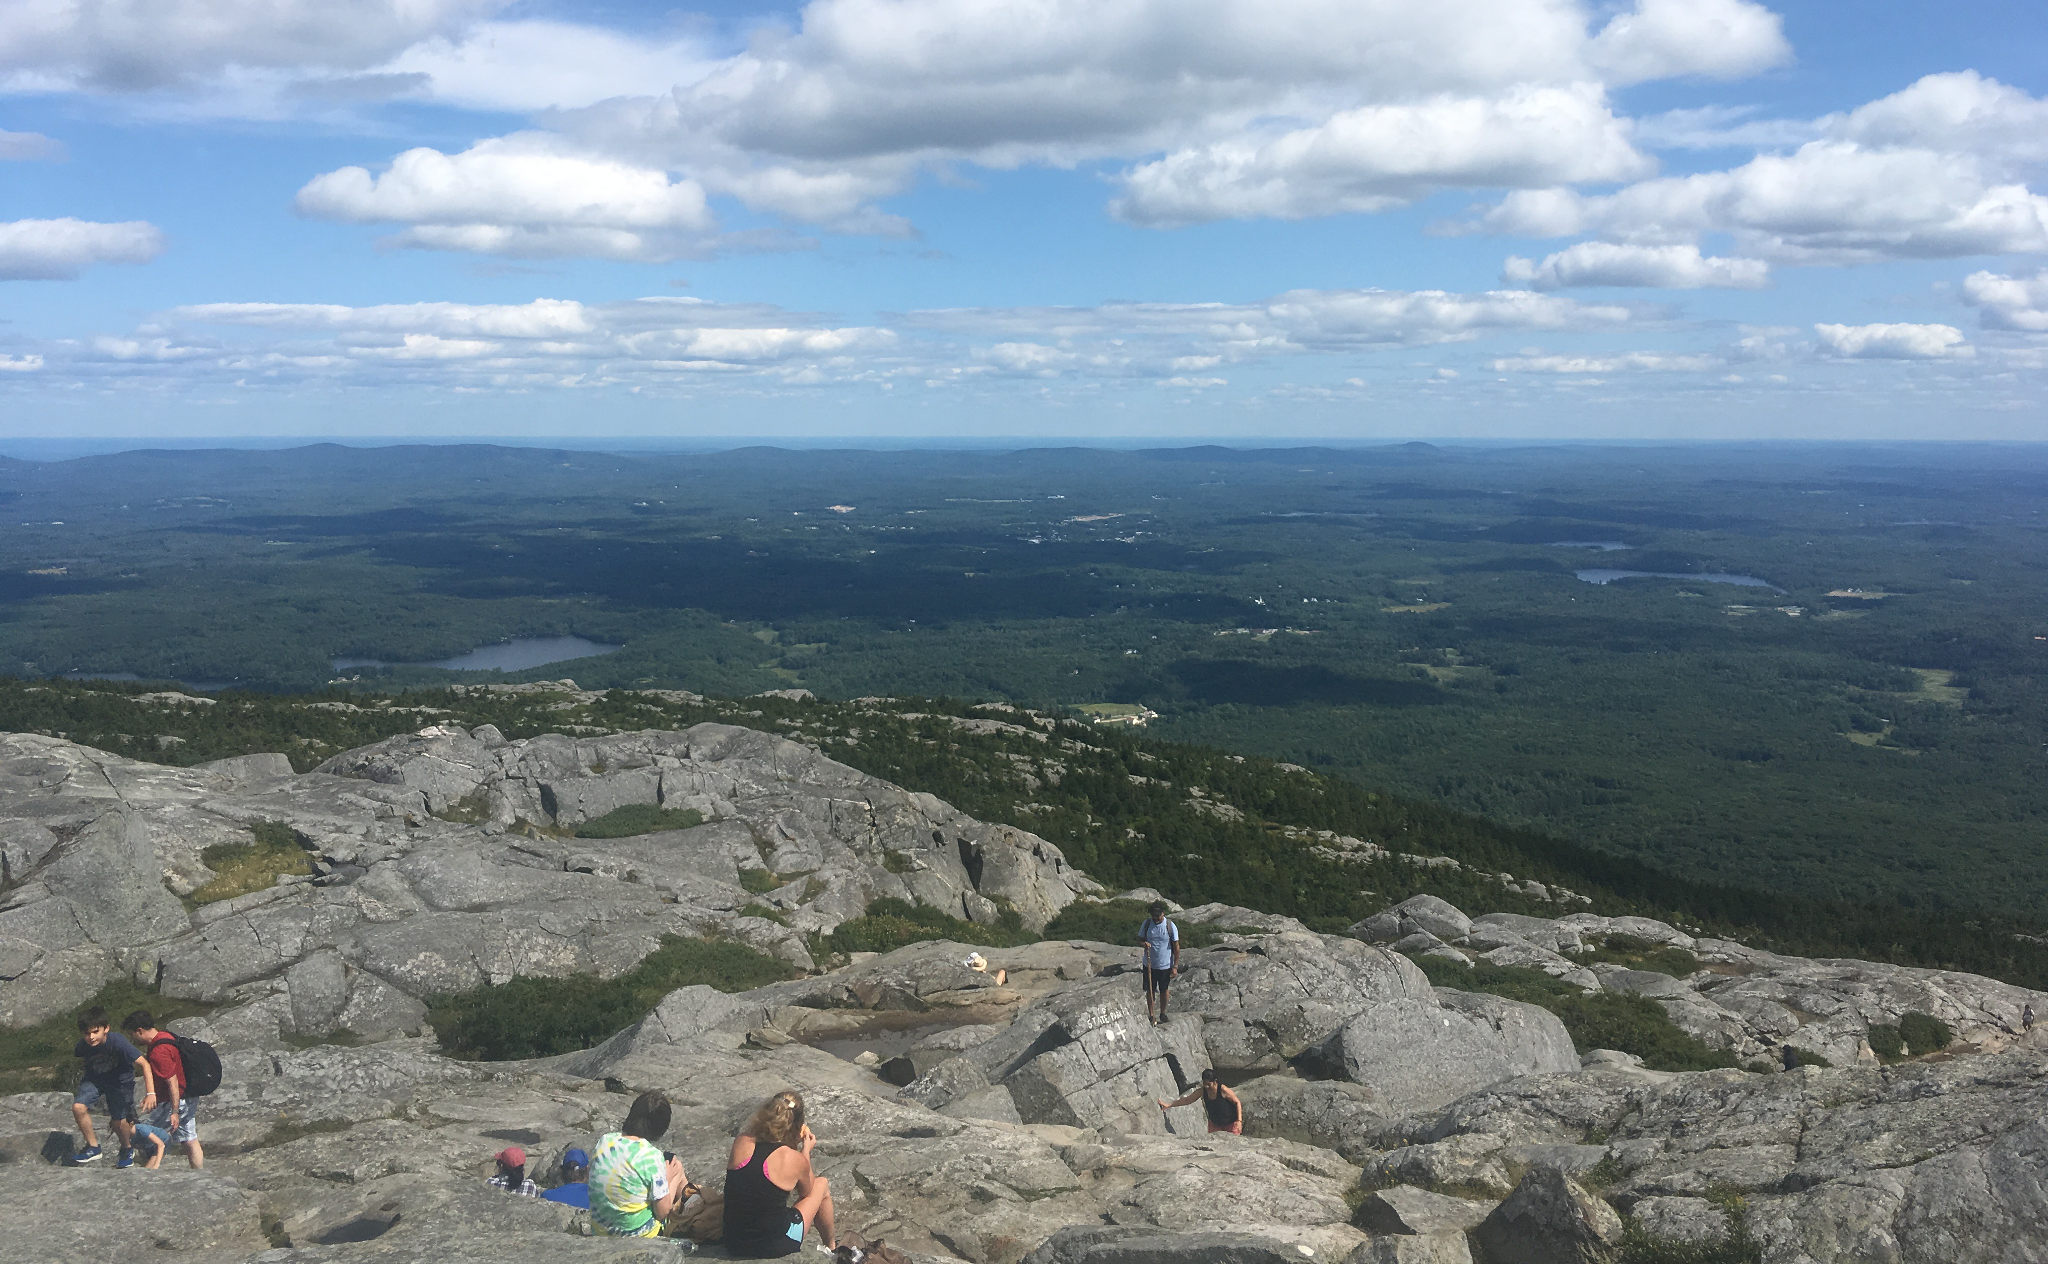 The view from the top of Monadnock